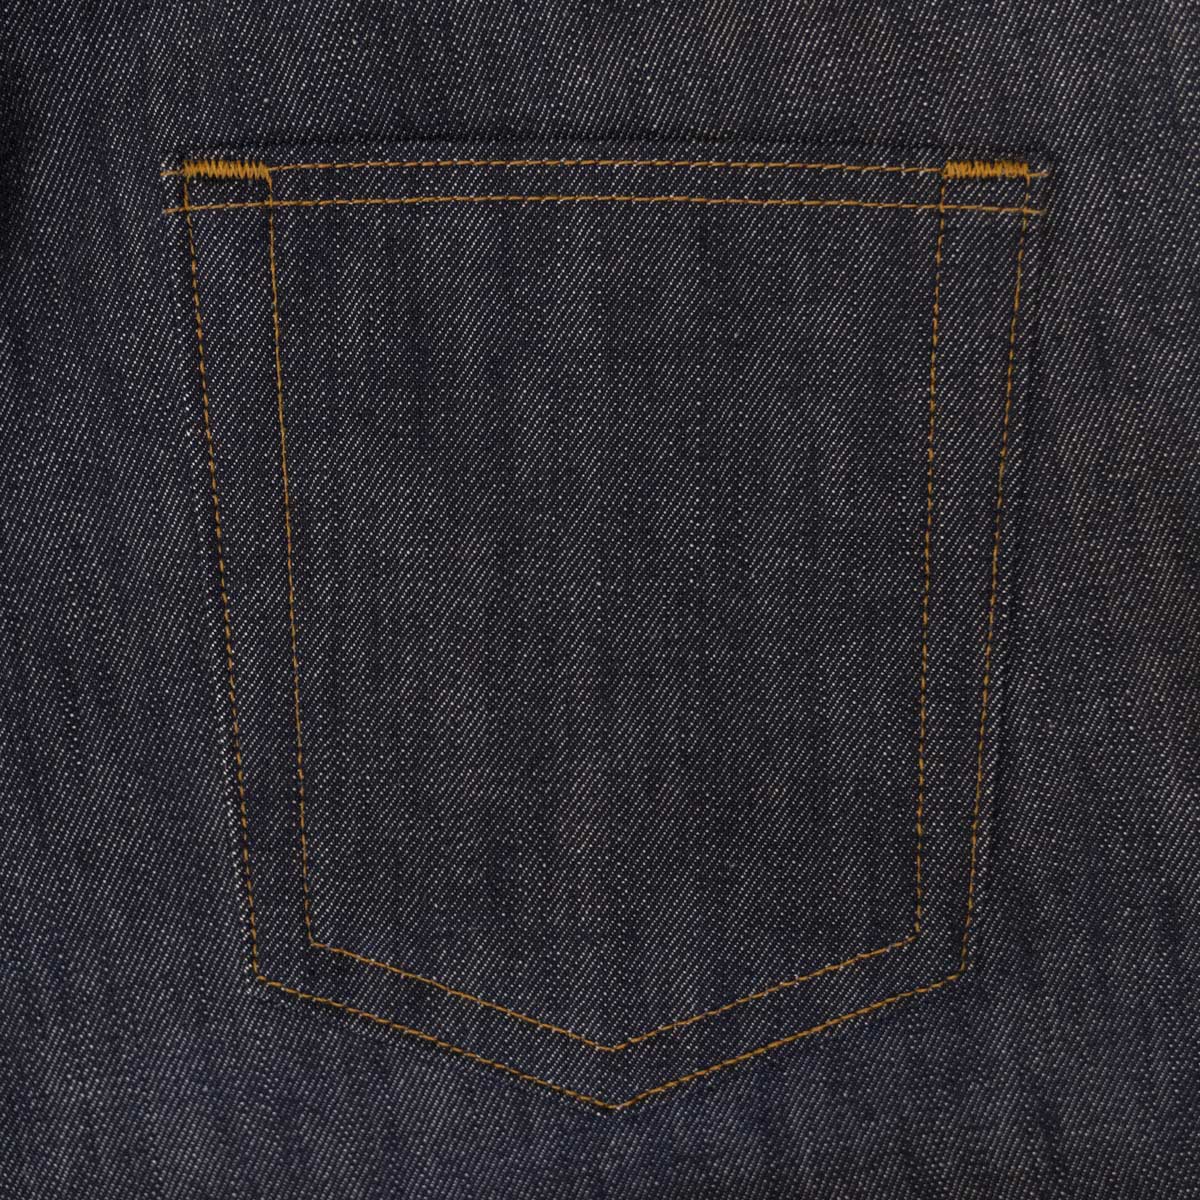 Tailored Fit Cone Mills White Oak Selvage.